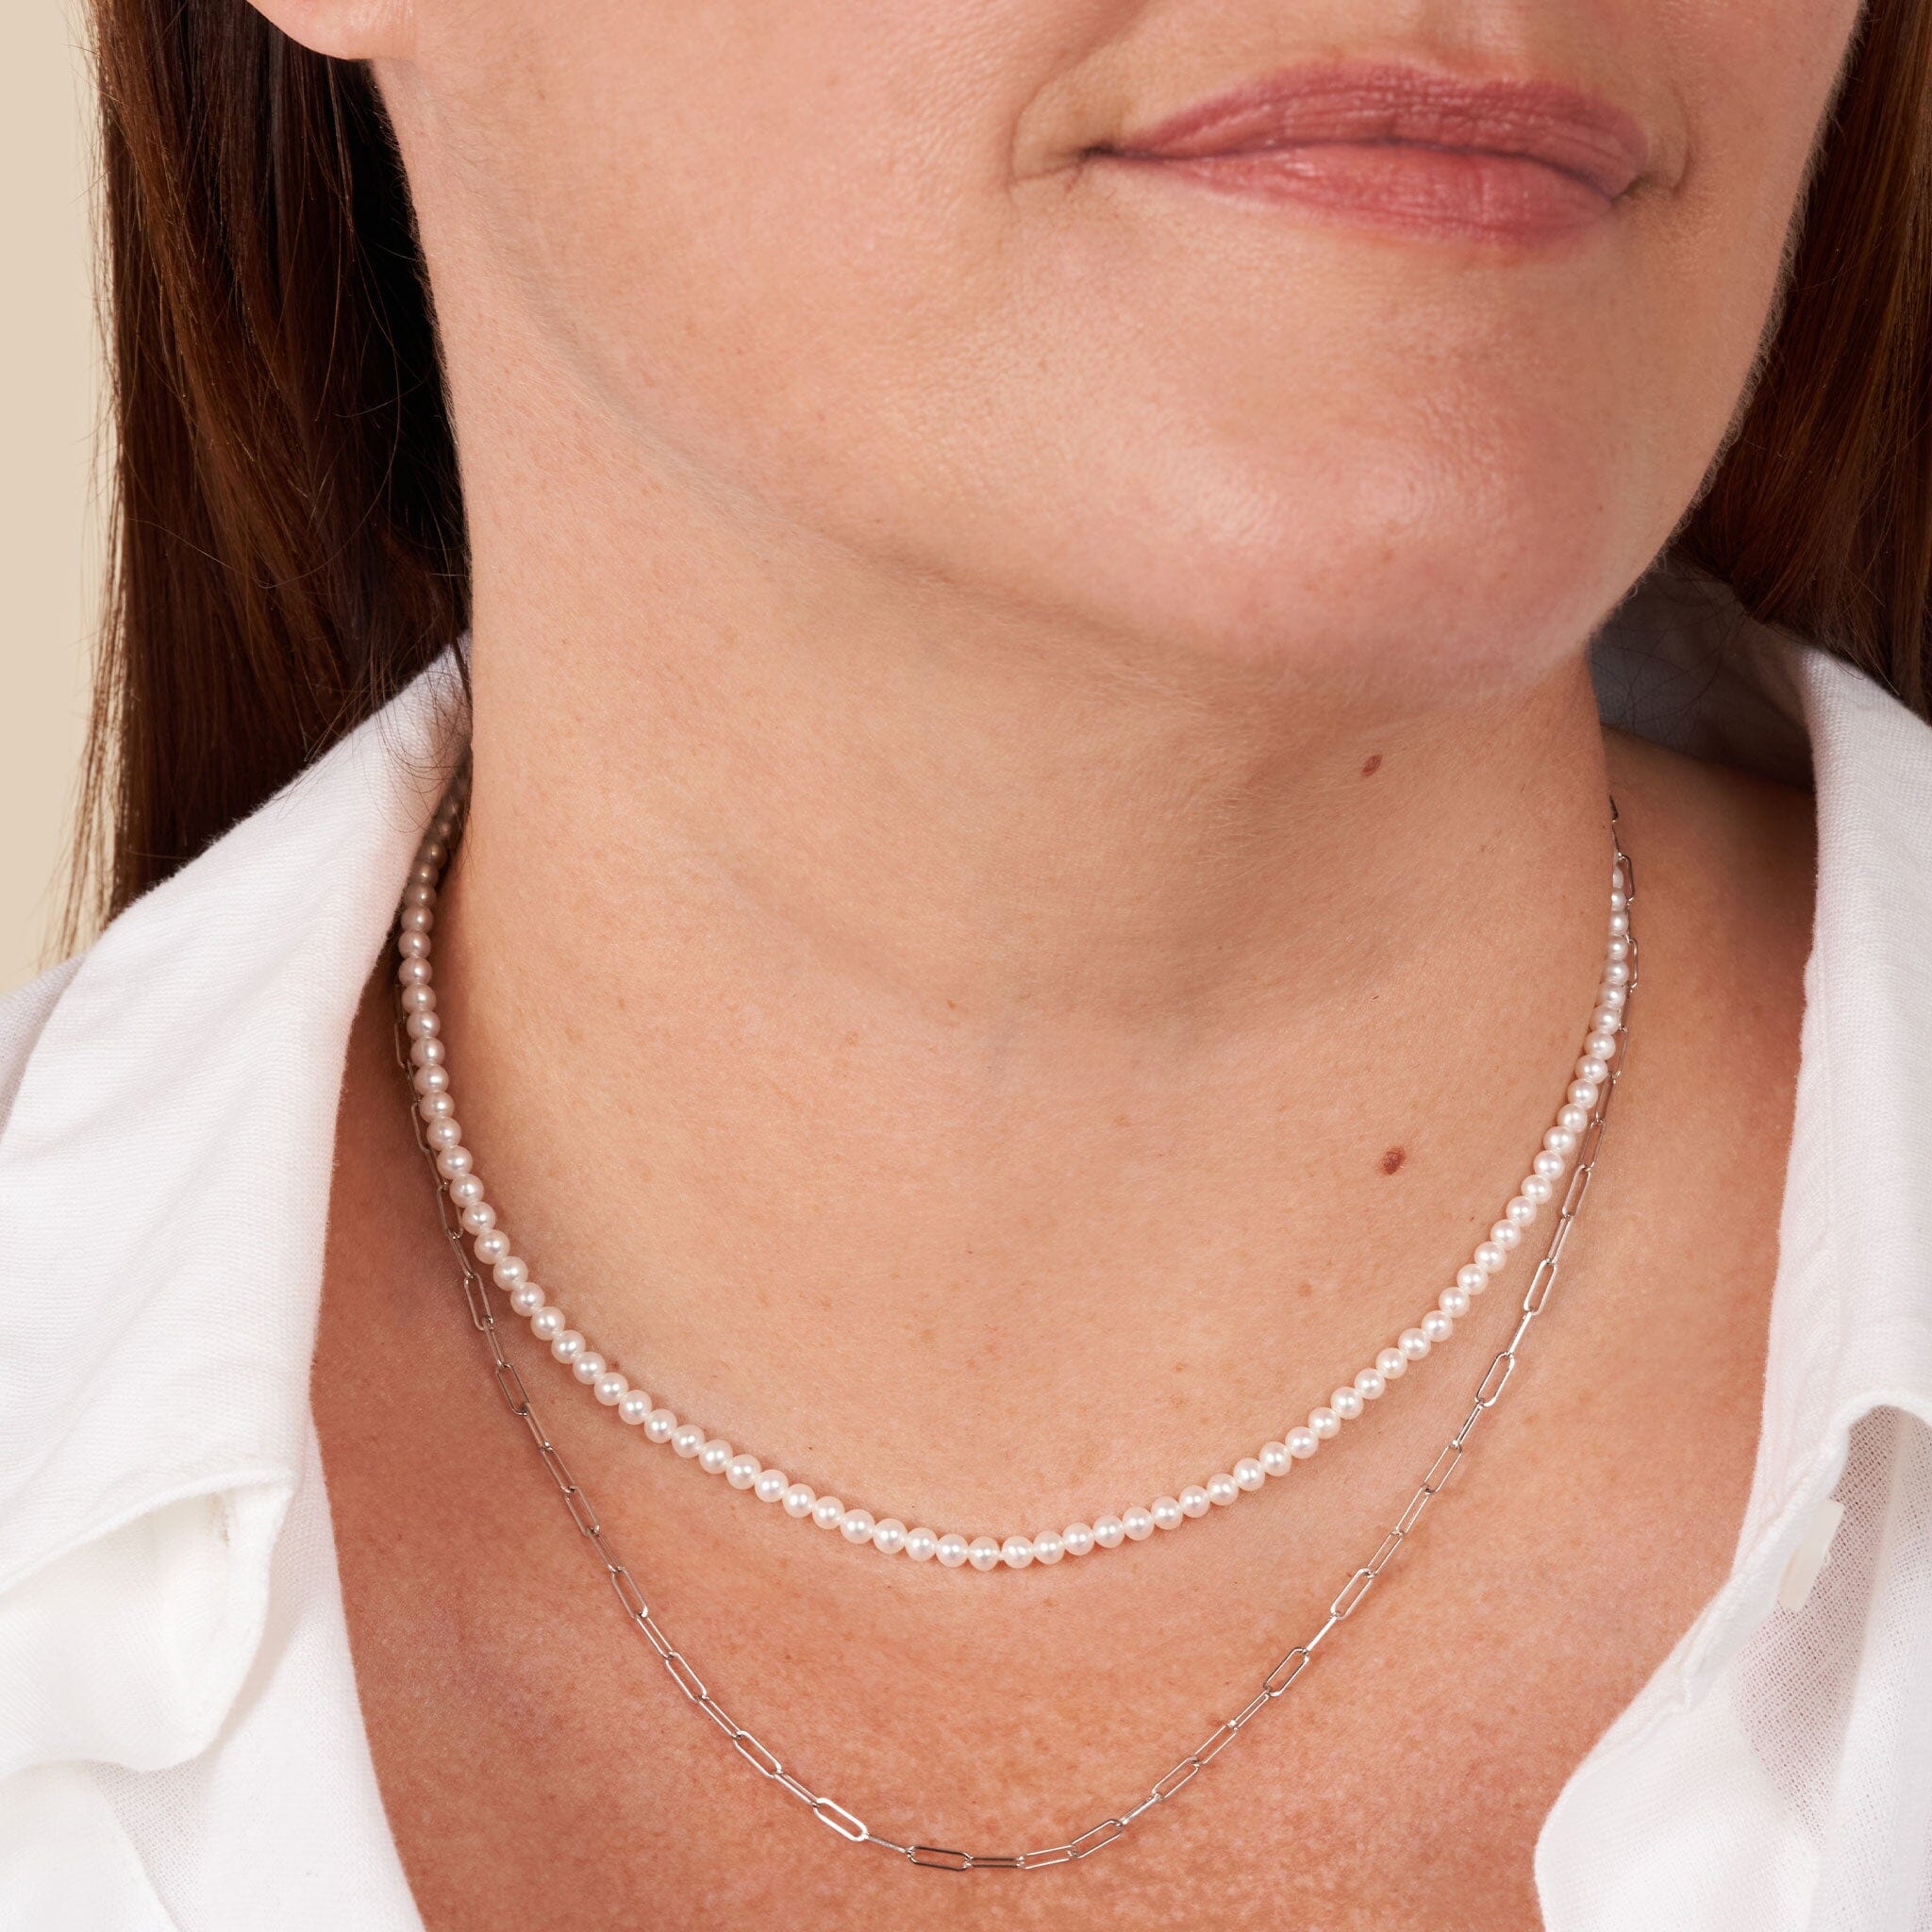 3.0-3.5 mm AAA Freshwater Pearl Necklace with Paperclip Chain Set - White Gold, 16 Inch on model